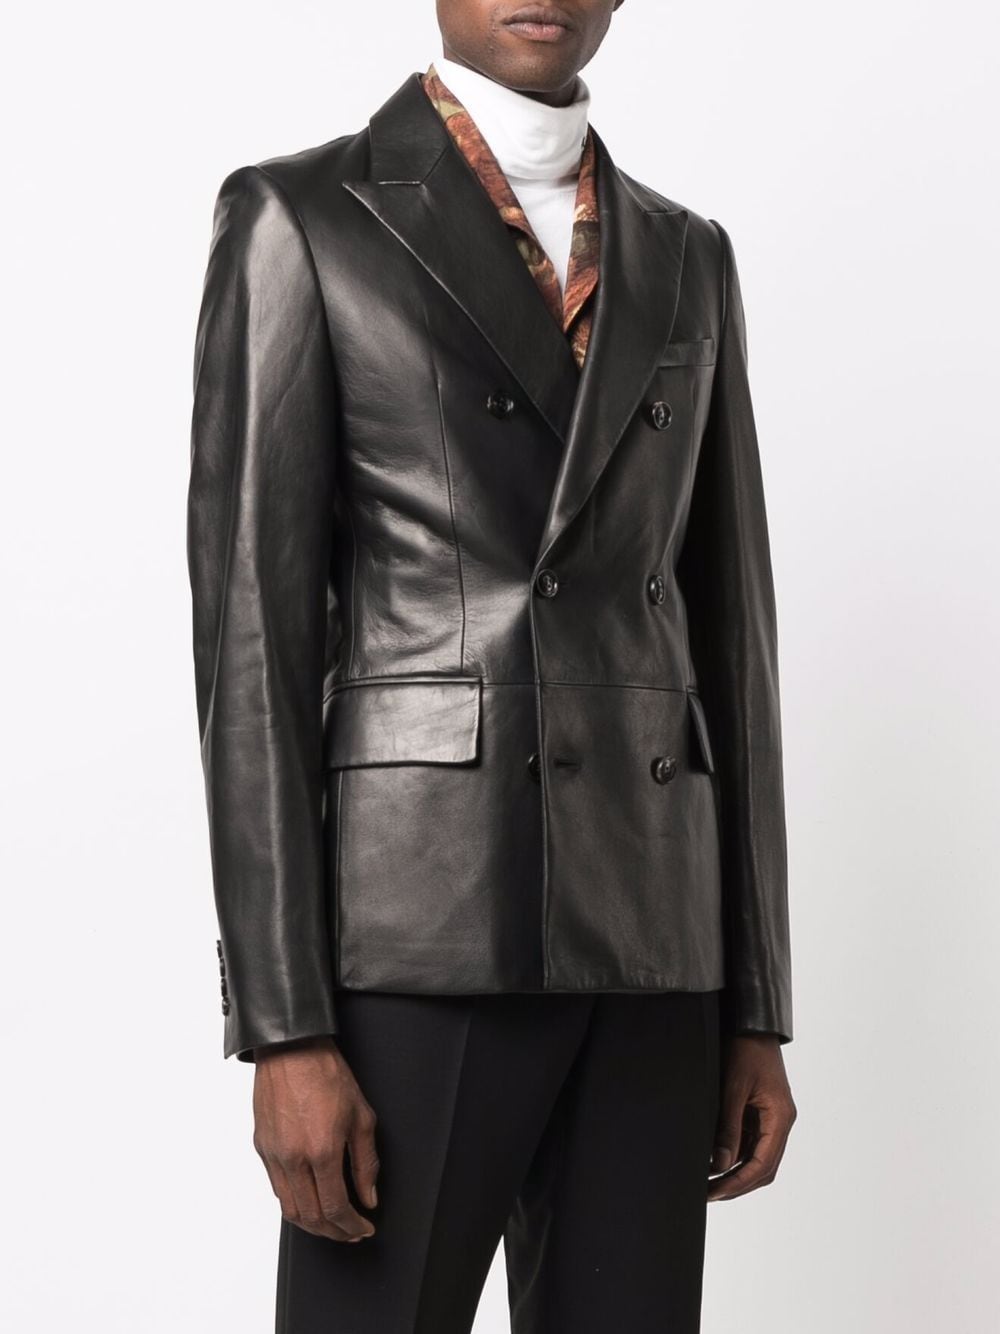 AMIRI double-breasted Leather Jacket - Farfetch